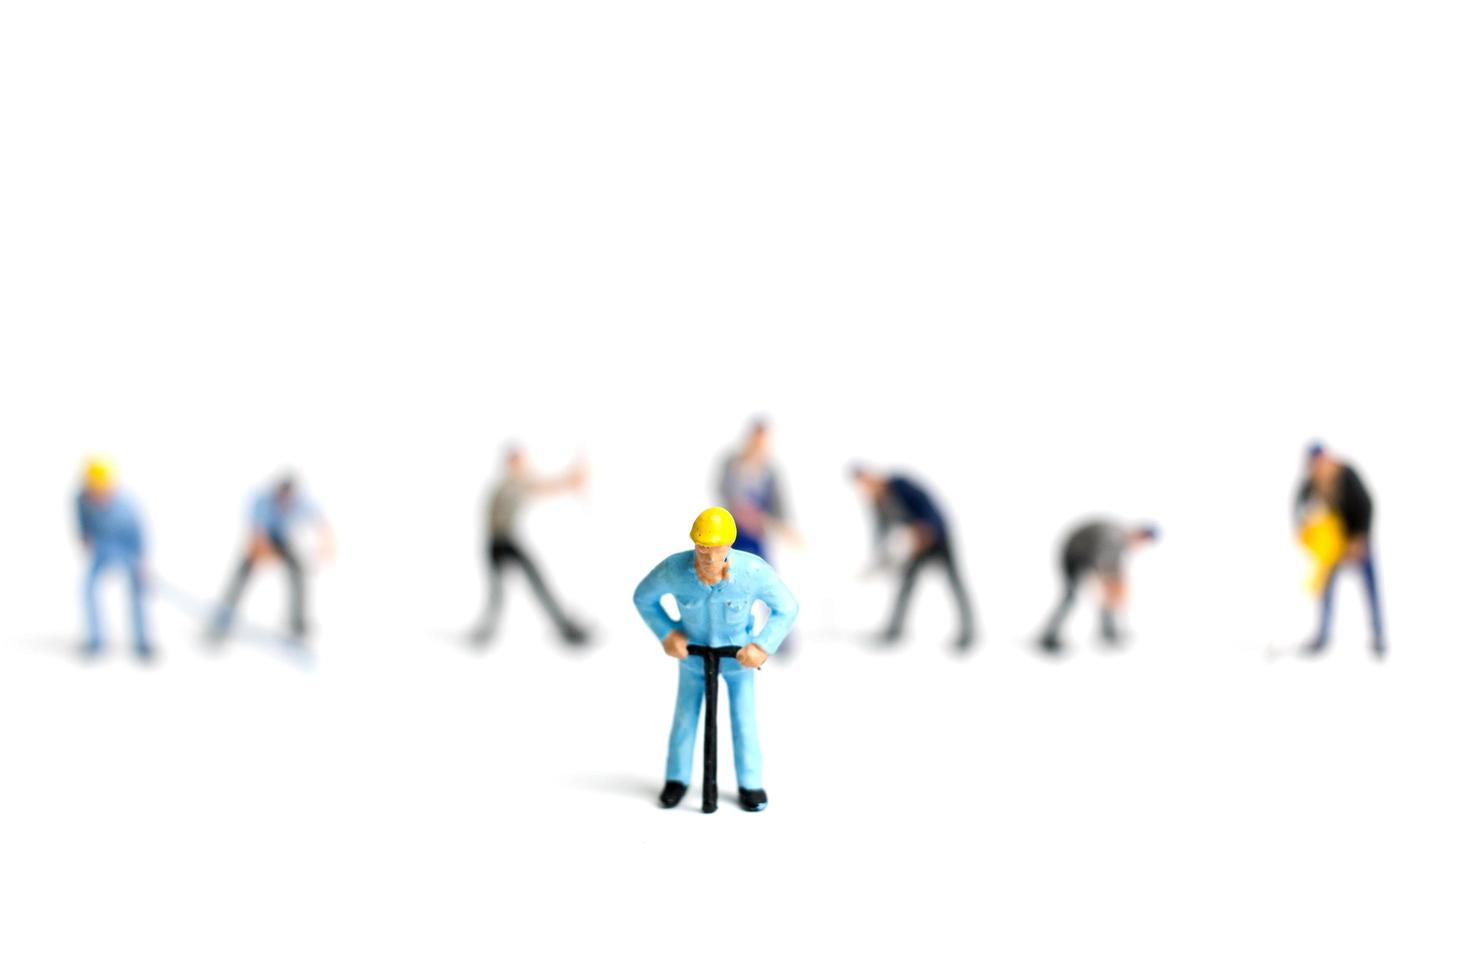 Miniature workers holding tools on a white background, construction concept photo